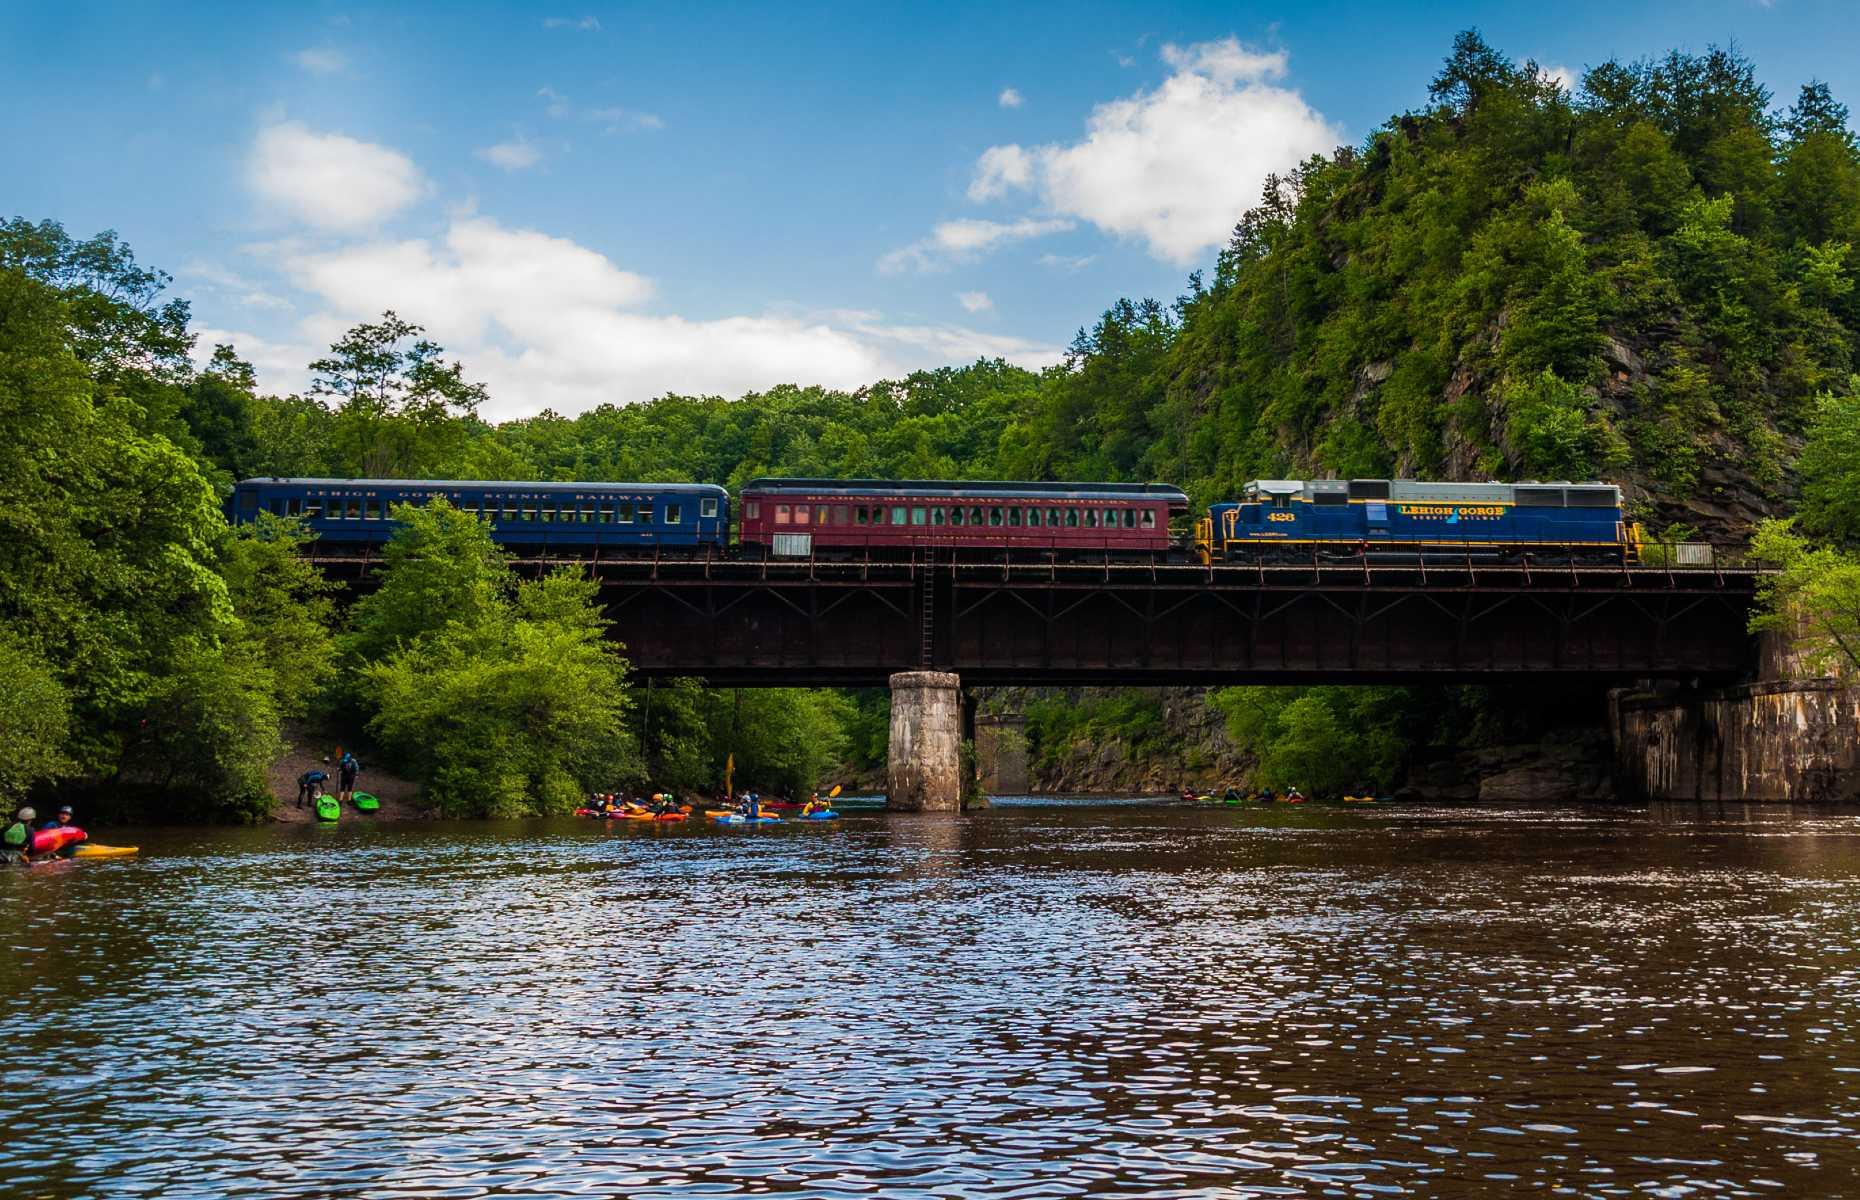 <p>This tourist train operates out of the historic town of Jim Thorpe, which has been called the Switzerland of America in its time. As its name might suggest, the Lehigh Gorge Scenic Railway is swaddled by towering cliffs, mountains, and abundant wildlife on its forested run to Old Penn Haven.</p>  <p>Featuring passenger cars that have been in service since as early as 1917, the train offers open-air, vista-dome, and standard coach seating on its narrated 70-minute round-trip journeys.</p>